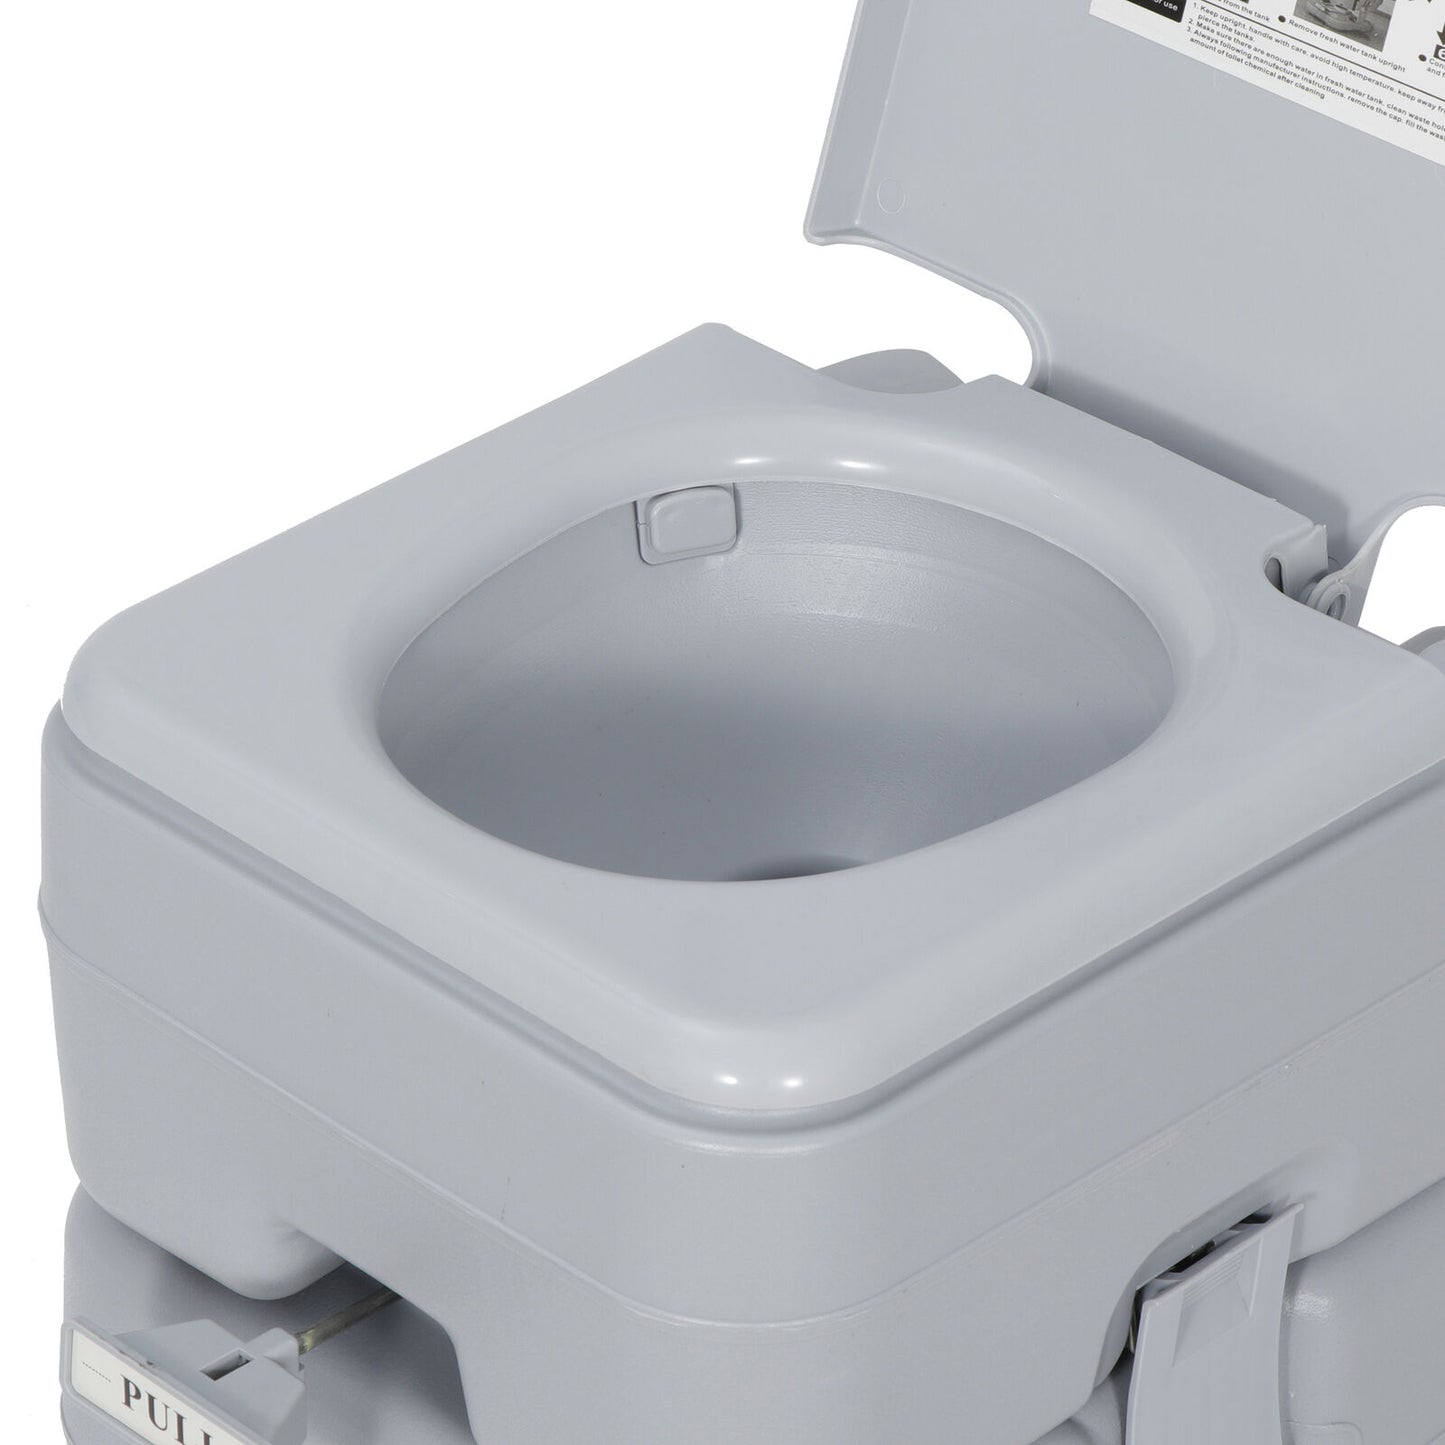 Portable Travel Toilet 6.6 Gallon 20L Designed Camping Commode Potty In/Outdoor